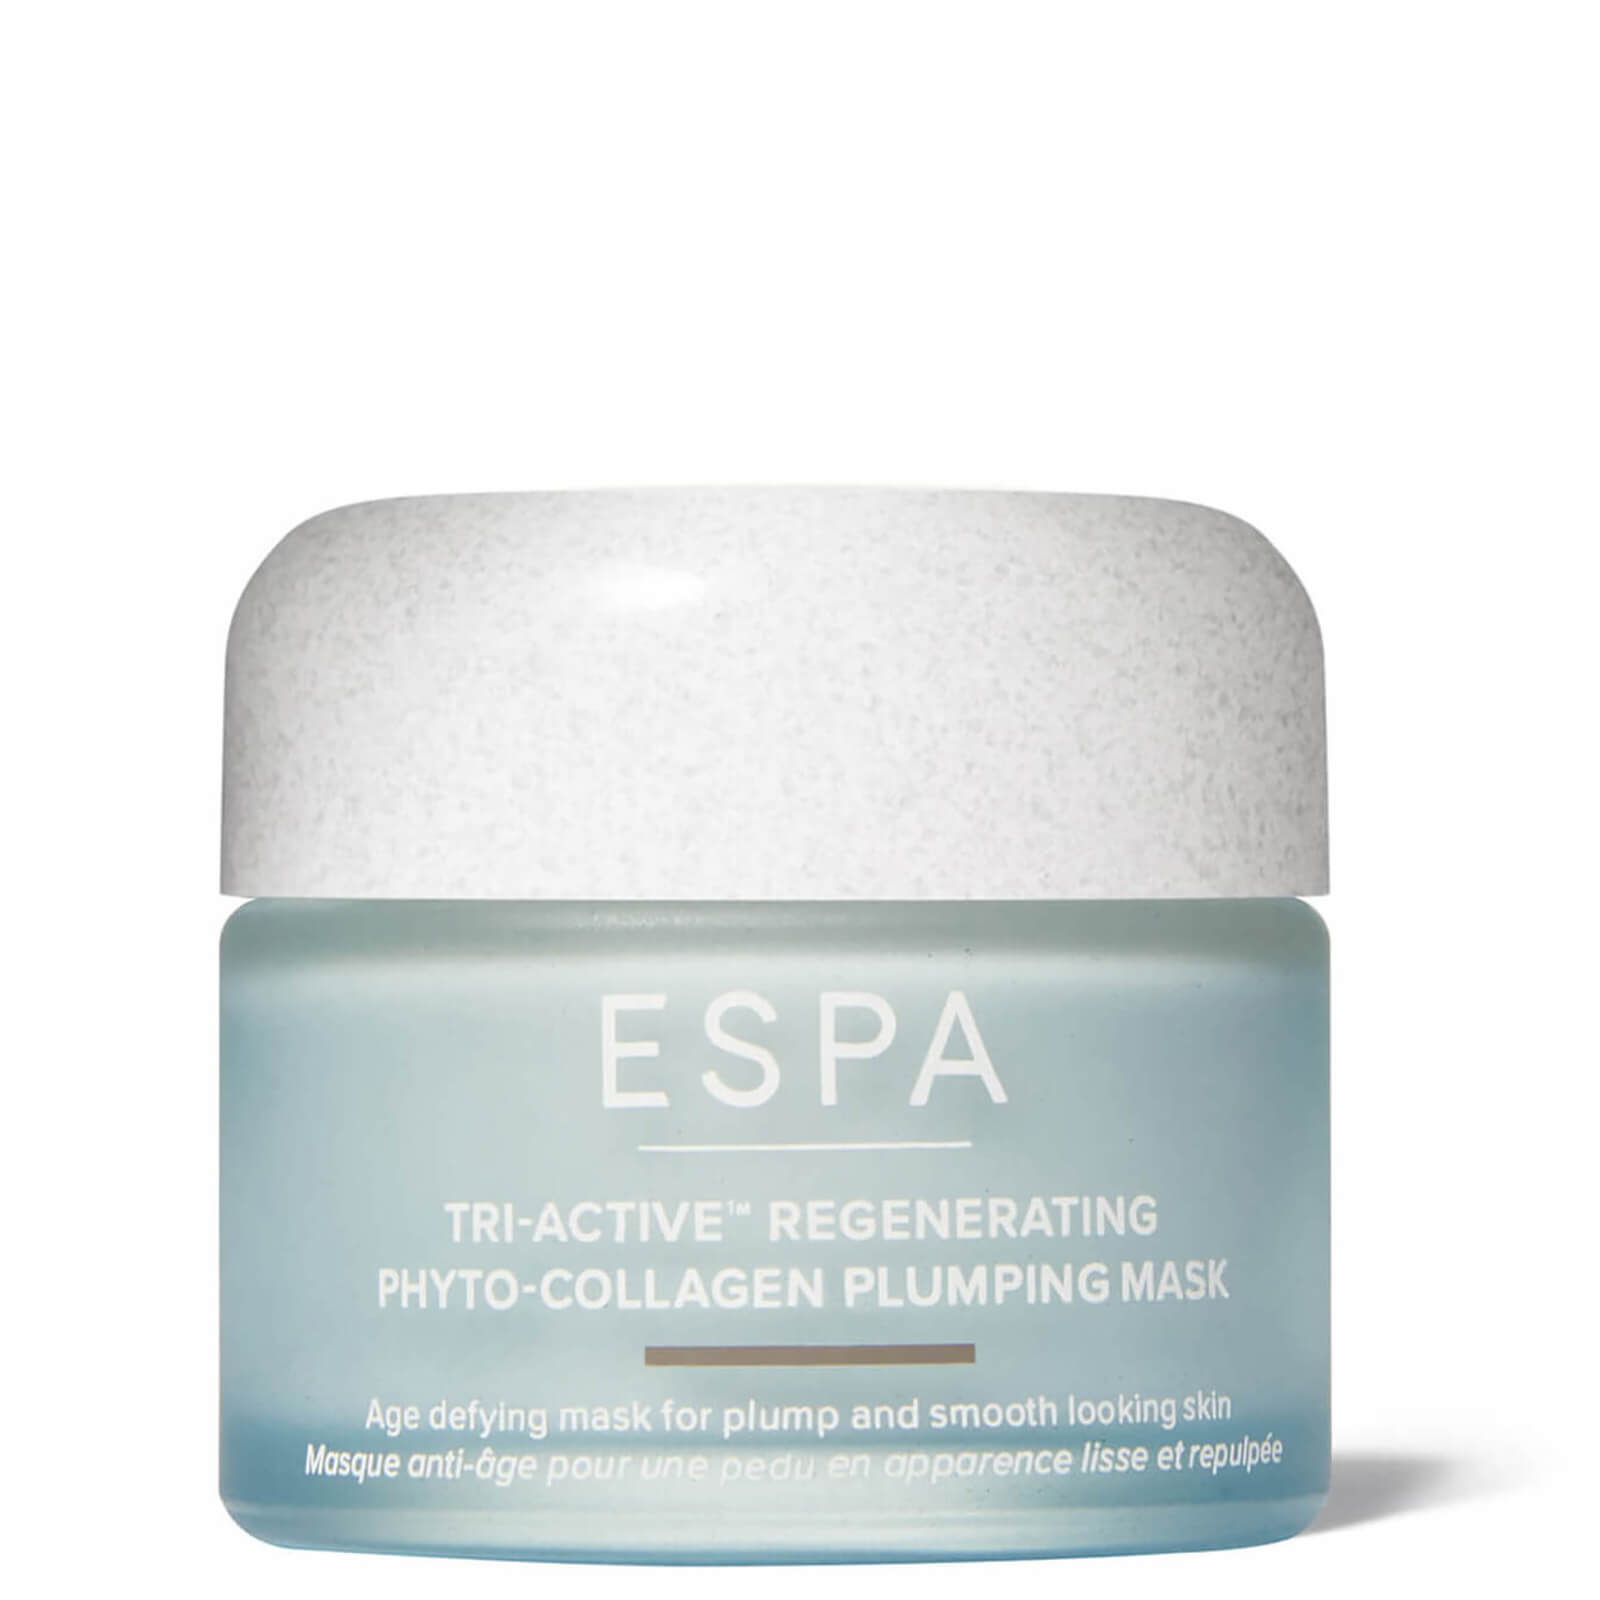 ESPA Phyto Collagen Plumping Mask 55ml